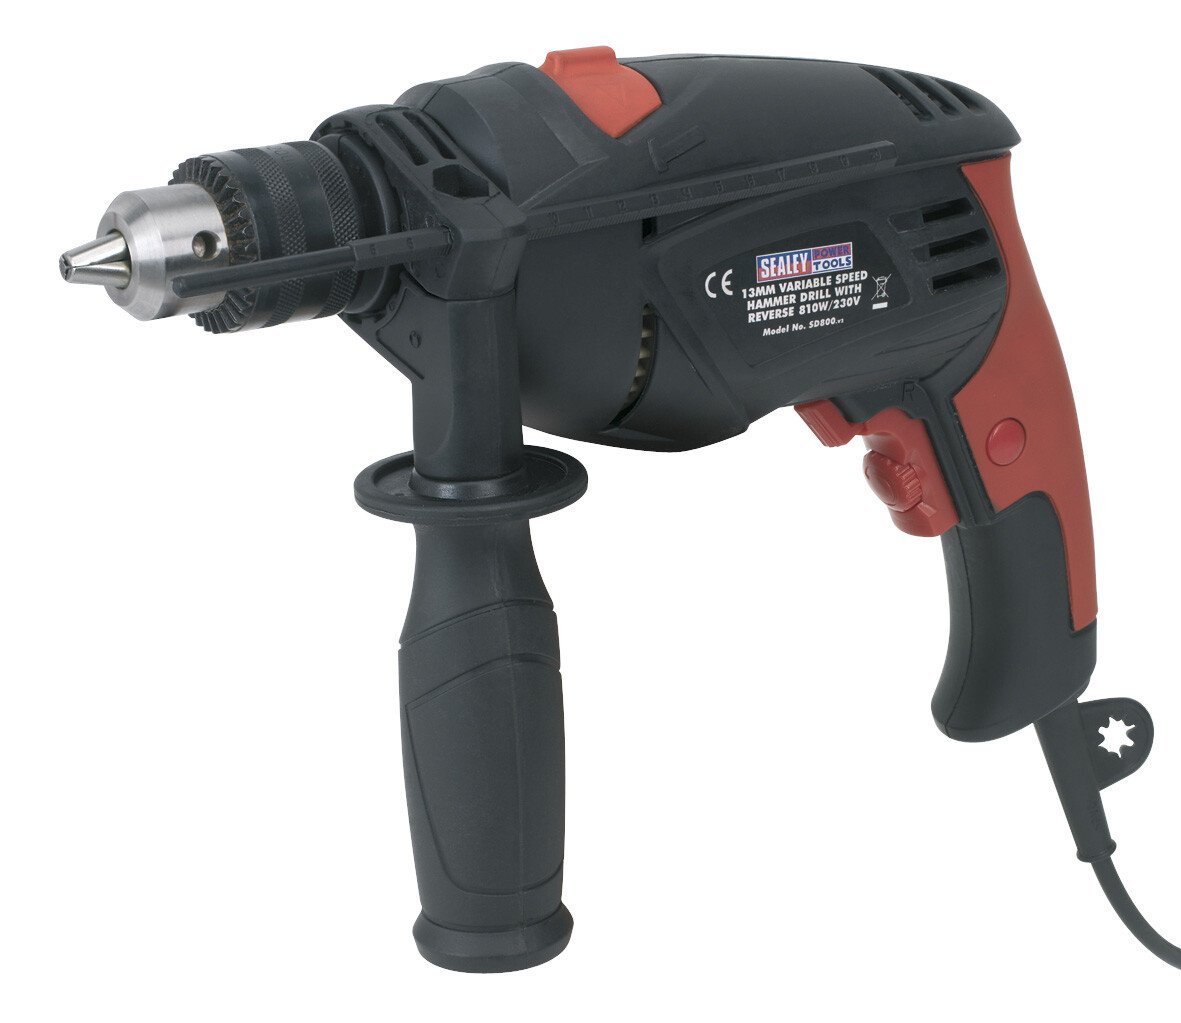 Sealey SD800 Hammer Drill 13mm Variable Speed with Reverse 800W/230V